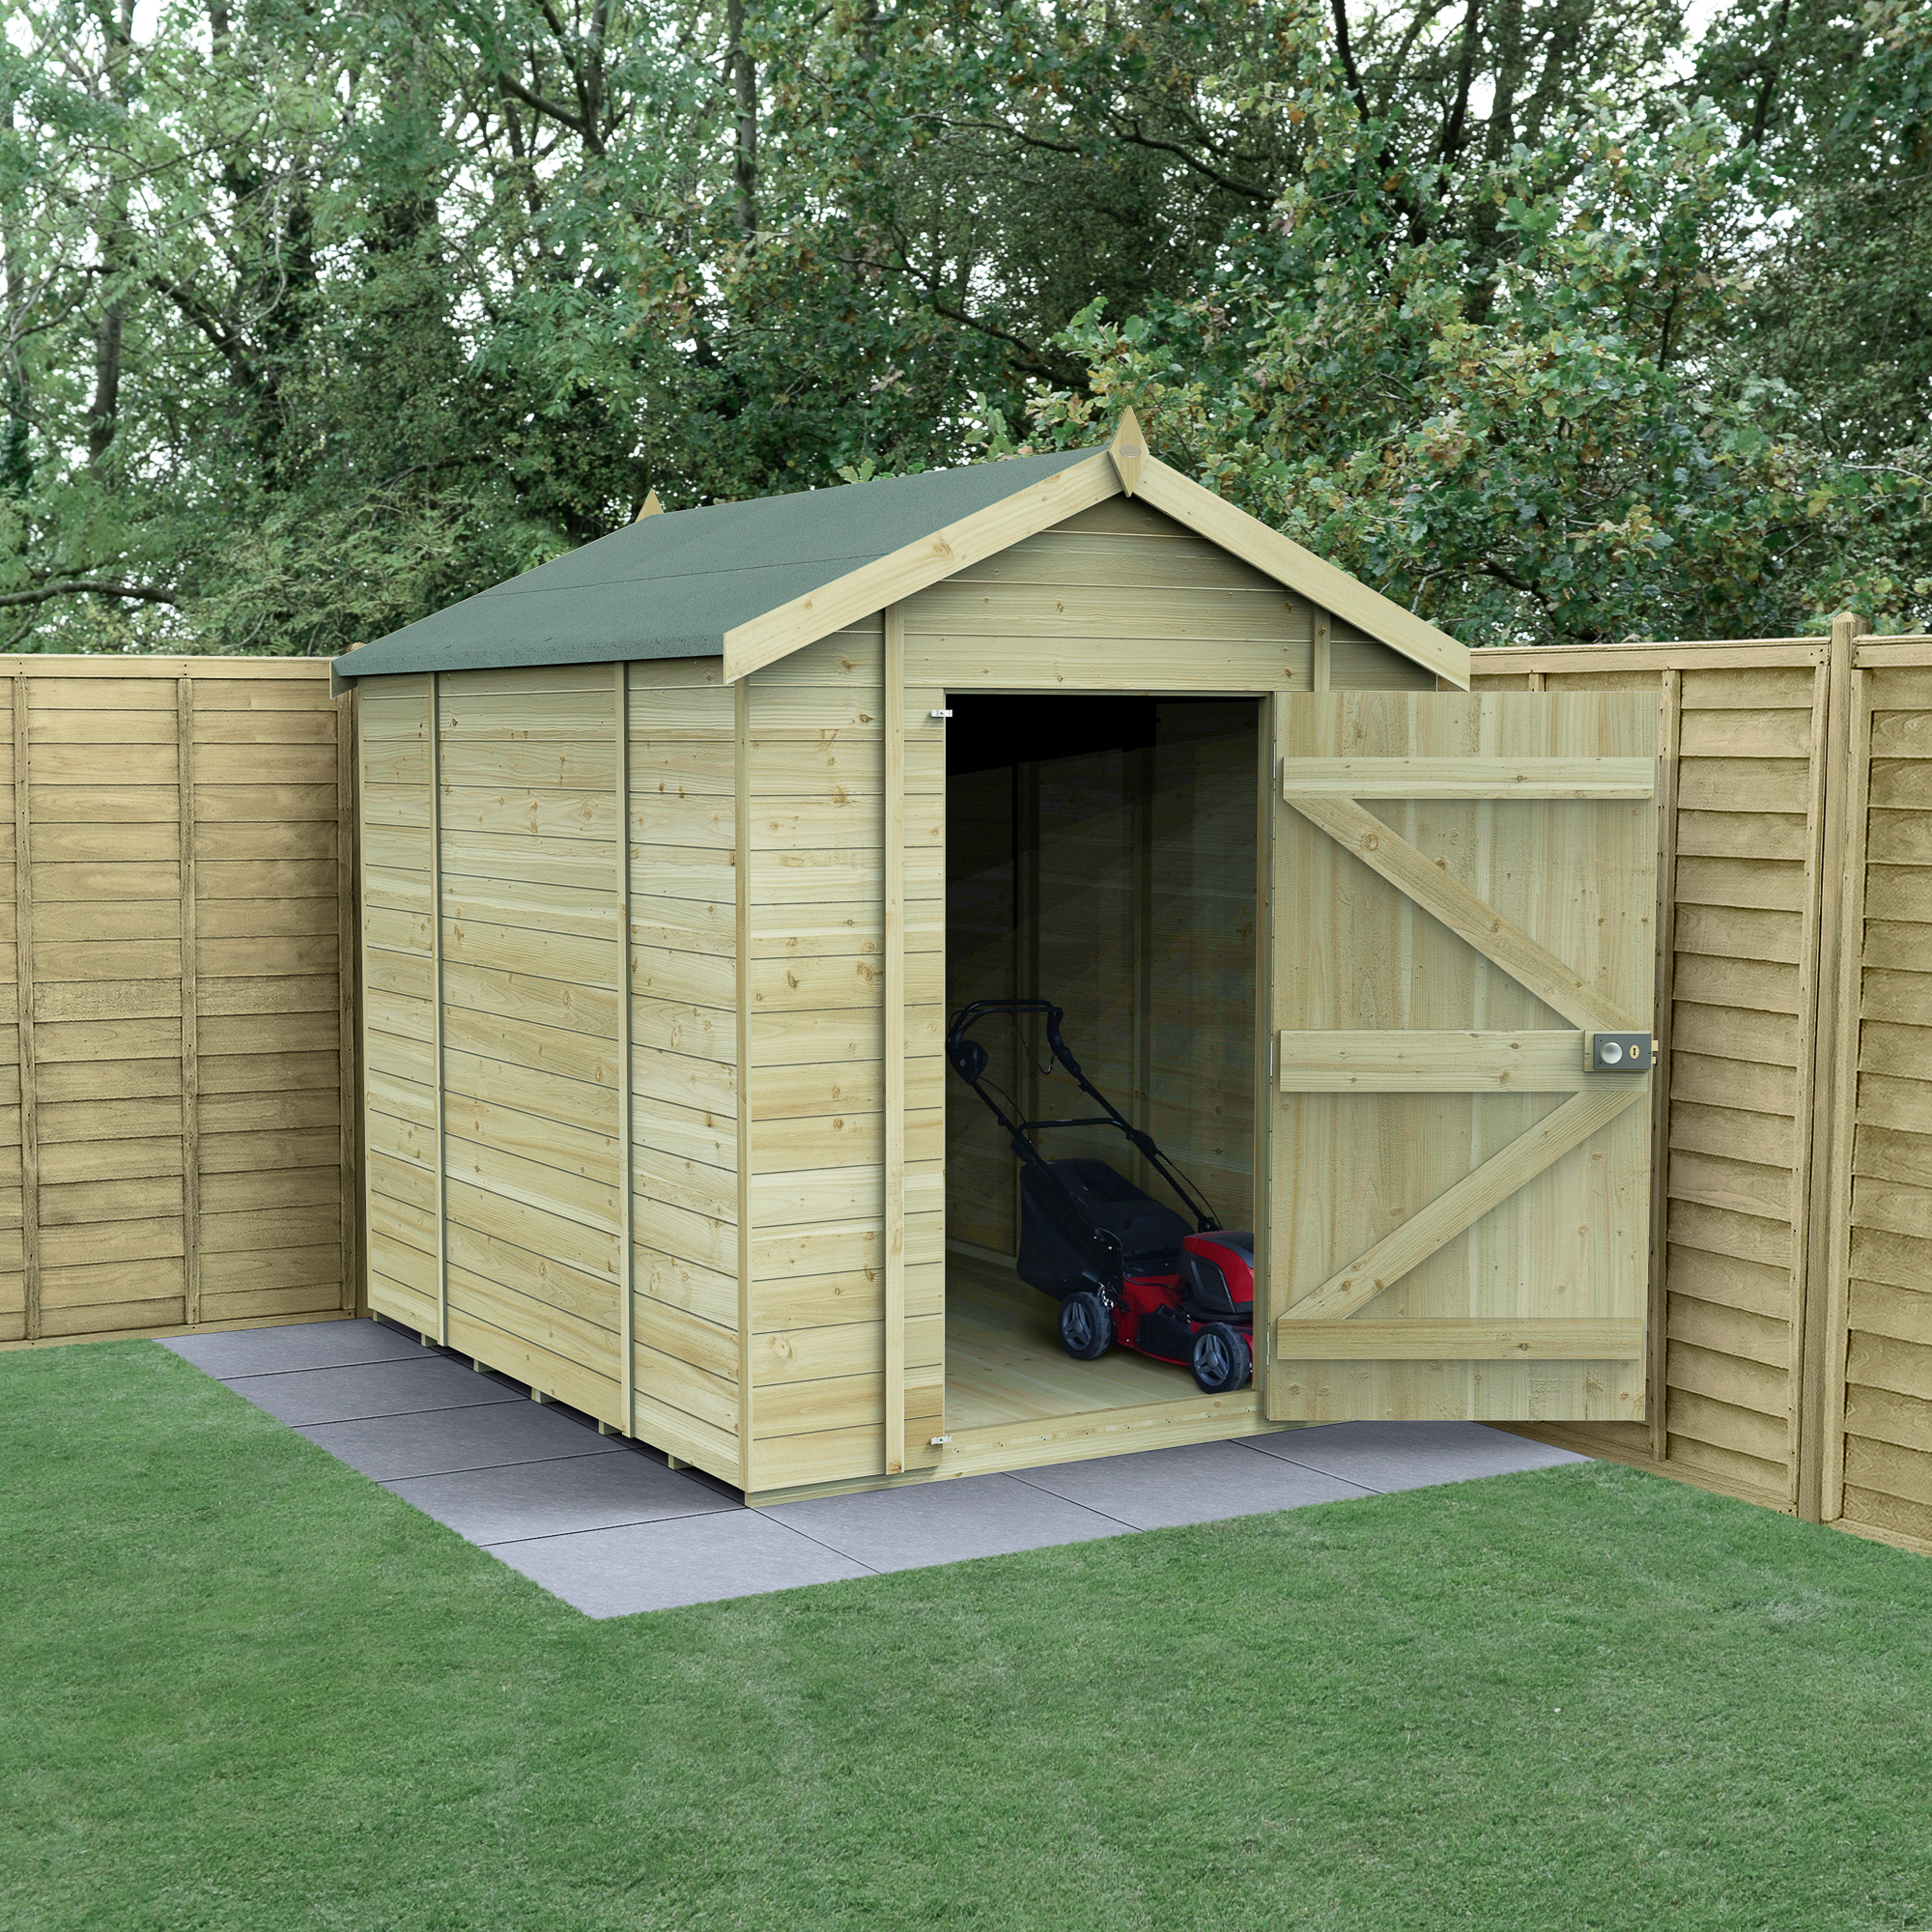 Forest Garden Timberdale 8 x 6ft Apex Tongue & Groove Pressure Treated Windowless Shed